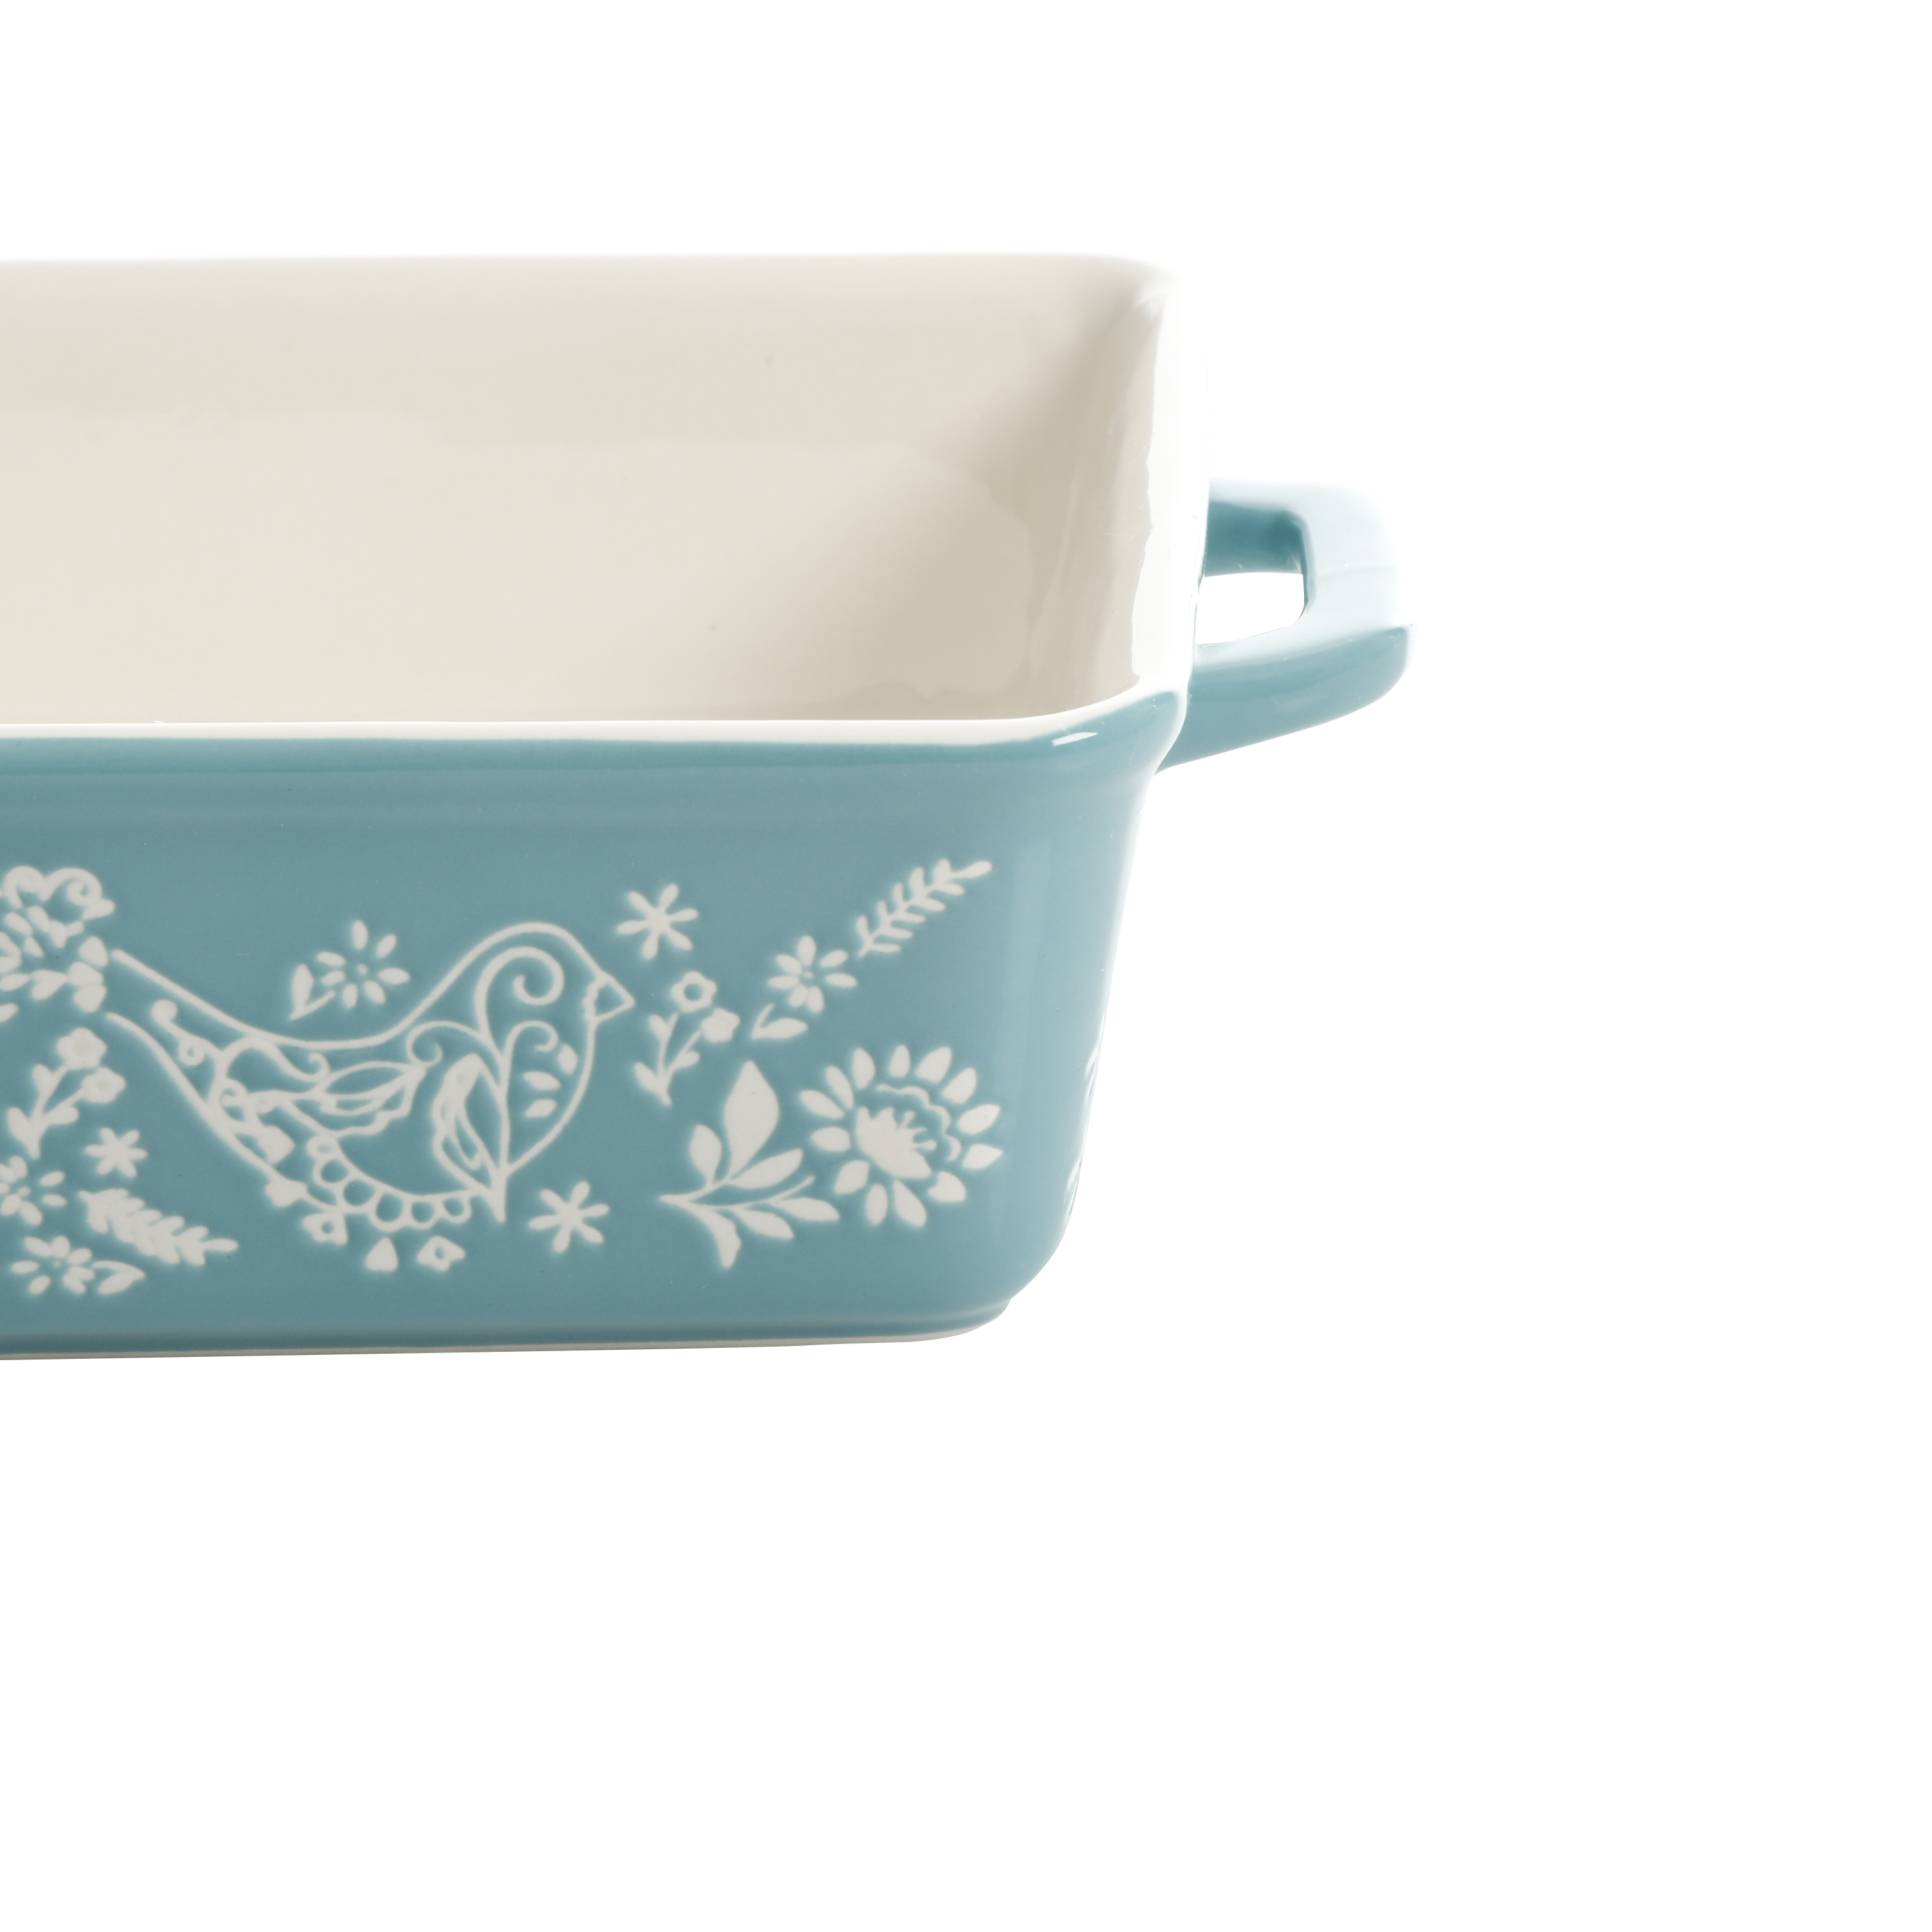 The Pioneer Woman Sweet Romance Blossoms Red, Teal 2-Piece Rectangular Ceramic Baking Dish - image 4 of 11